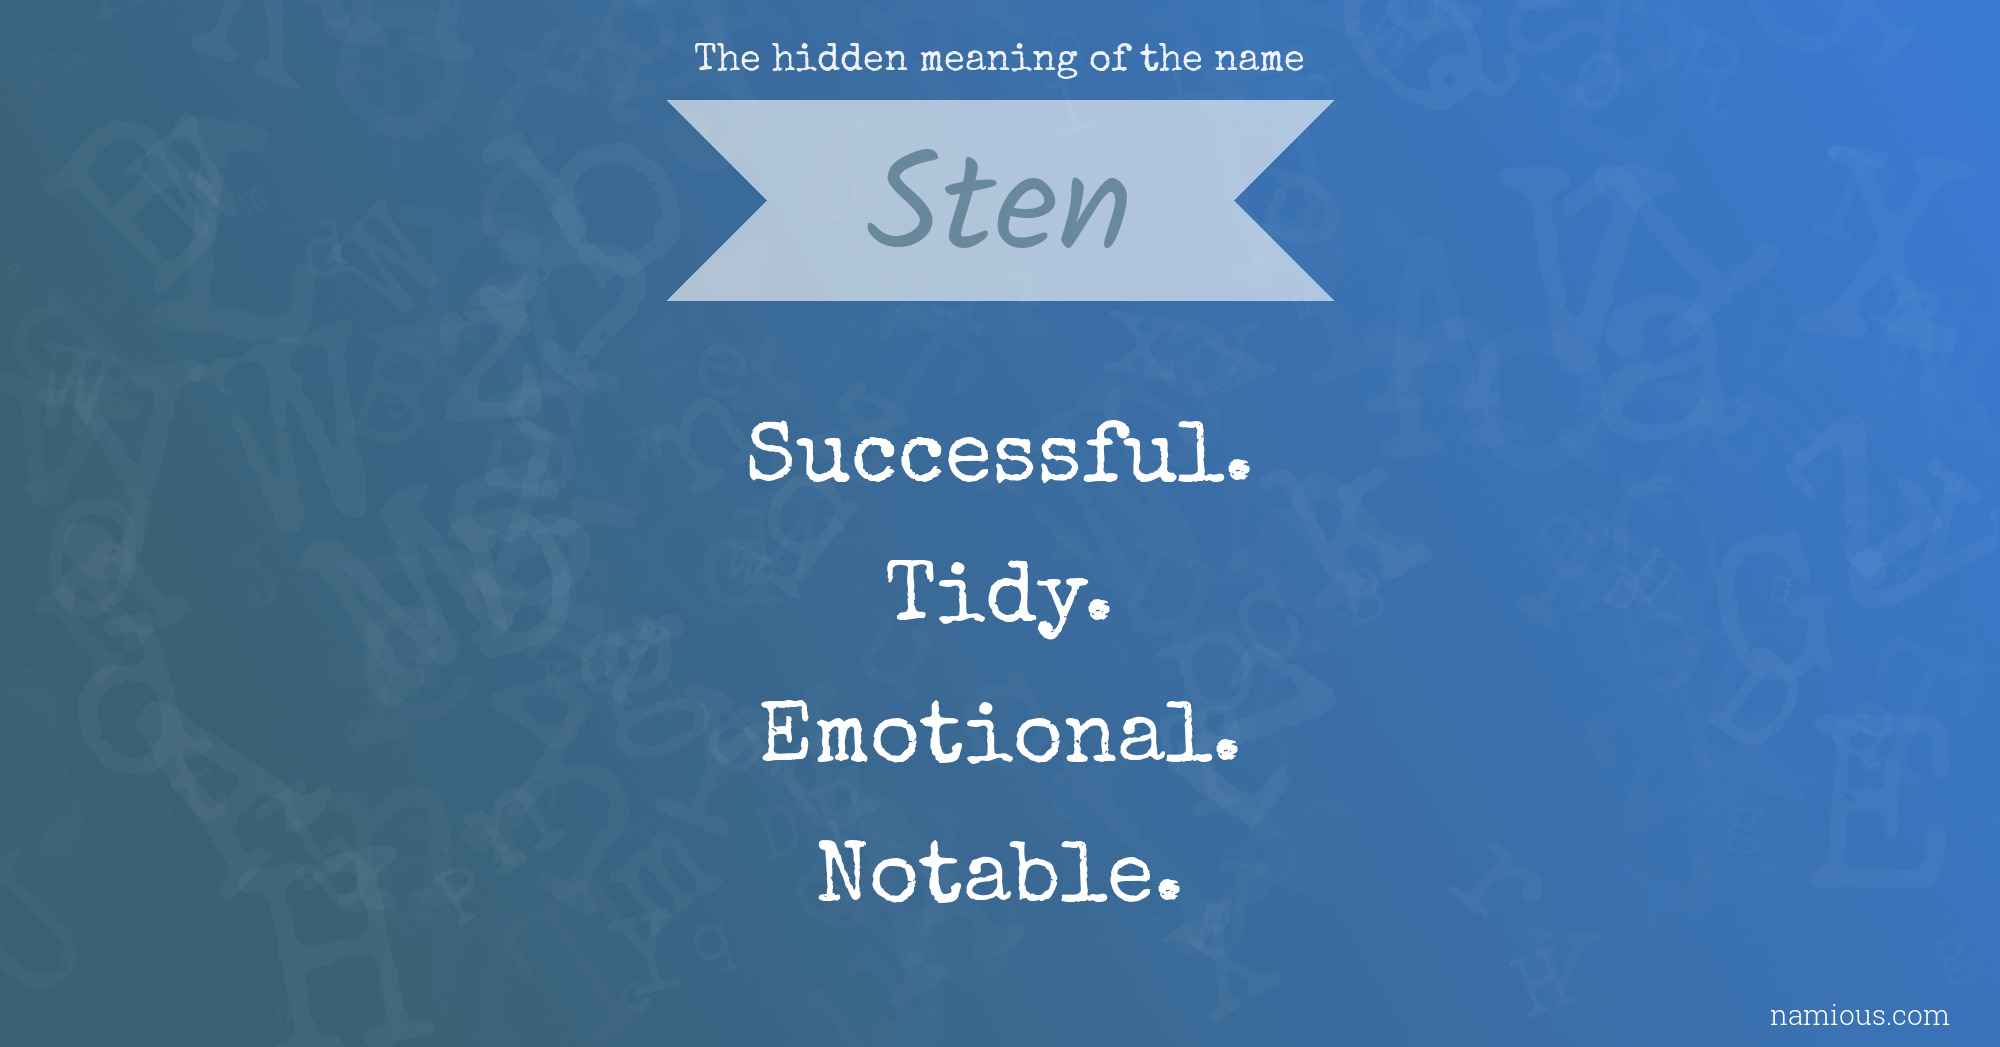 The hidden meaning of the name Sten